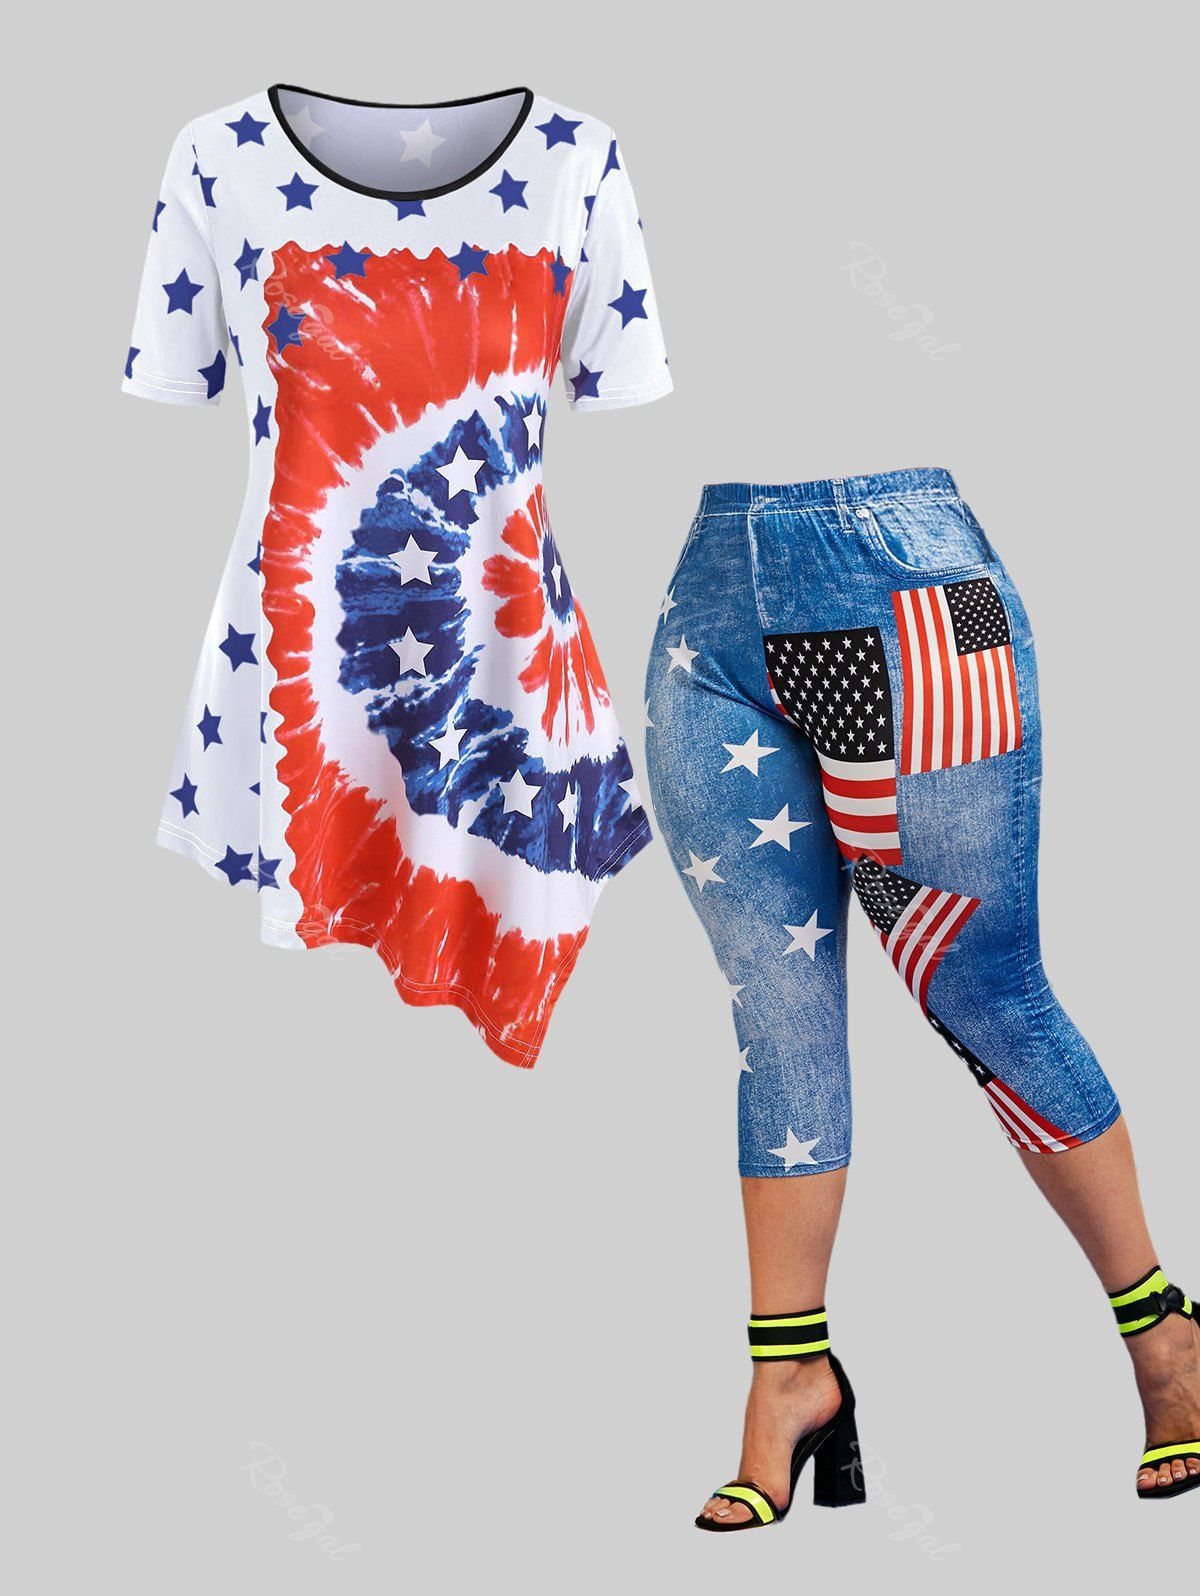 Discount Patriotic American Flag Print Asymmetrical Tee and Capri Jeggings Plus Size Summer Outfit  